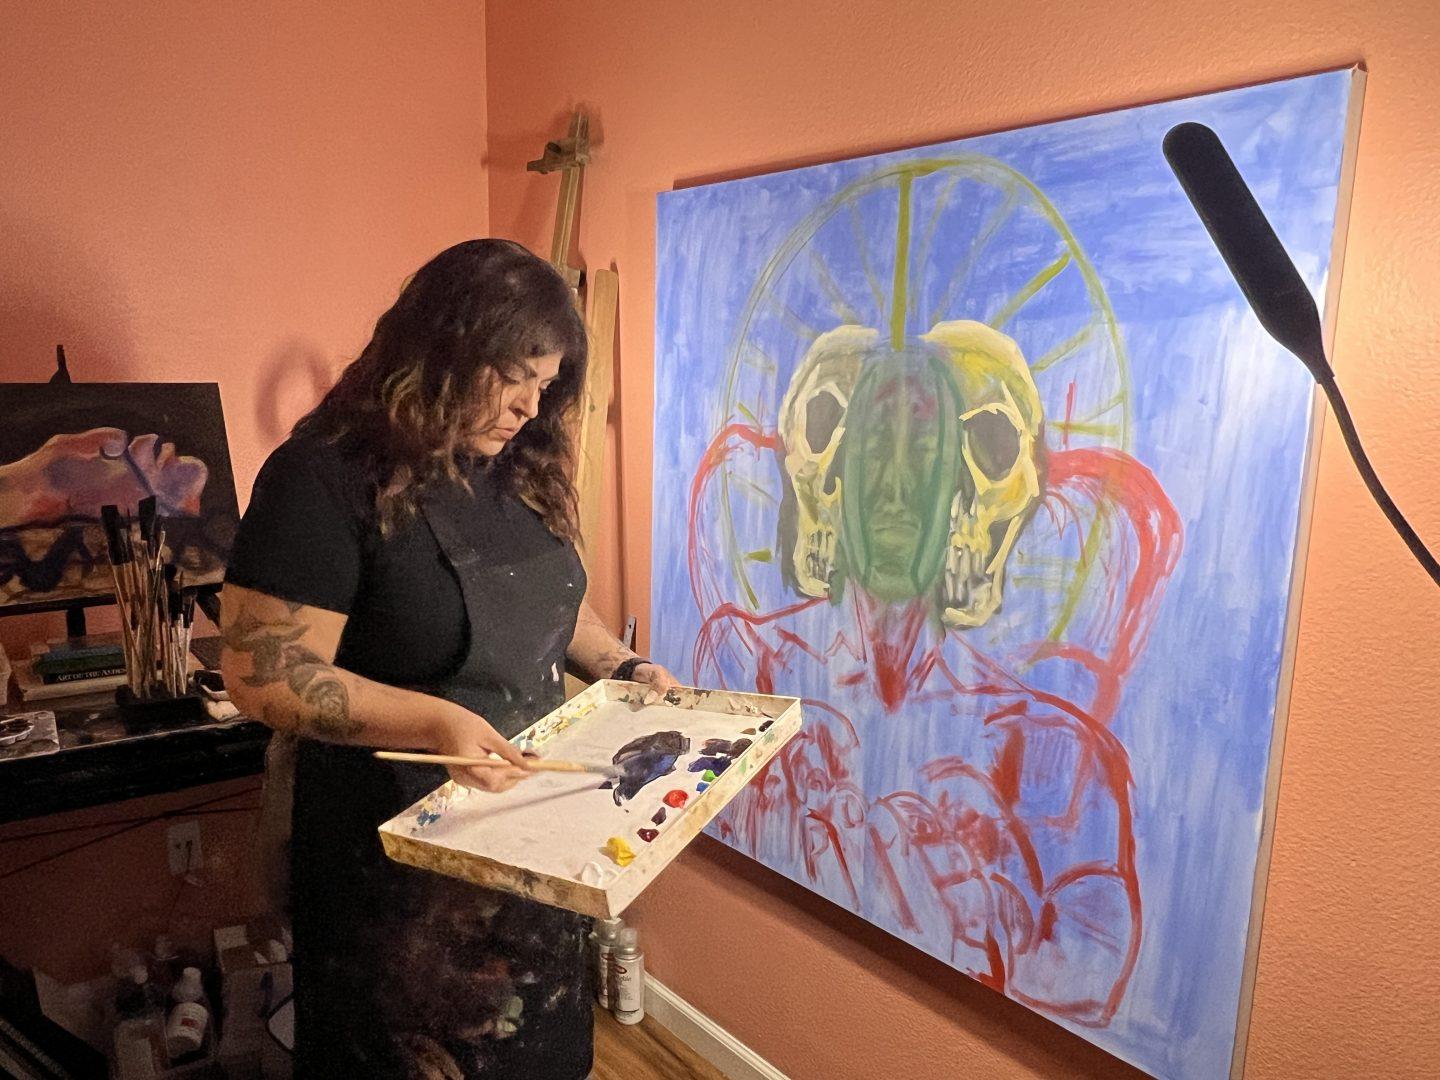 Fresno State student and artist Veronica Garcia focuses her personal experiences onto her canvases. (Viviana Hinojos/The Collegian)